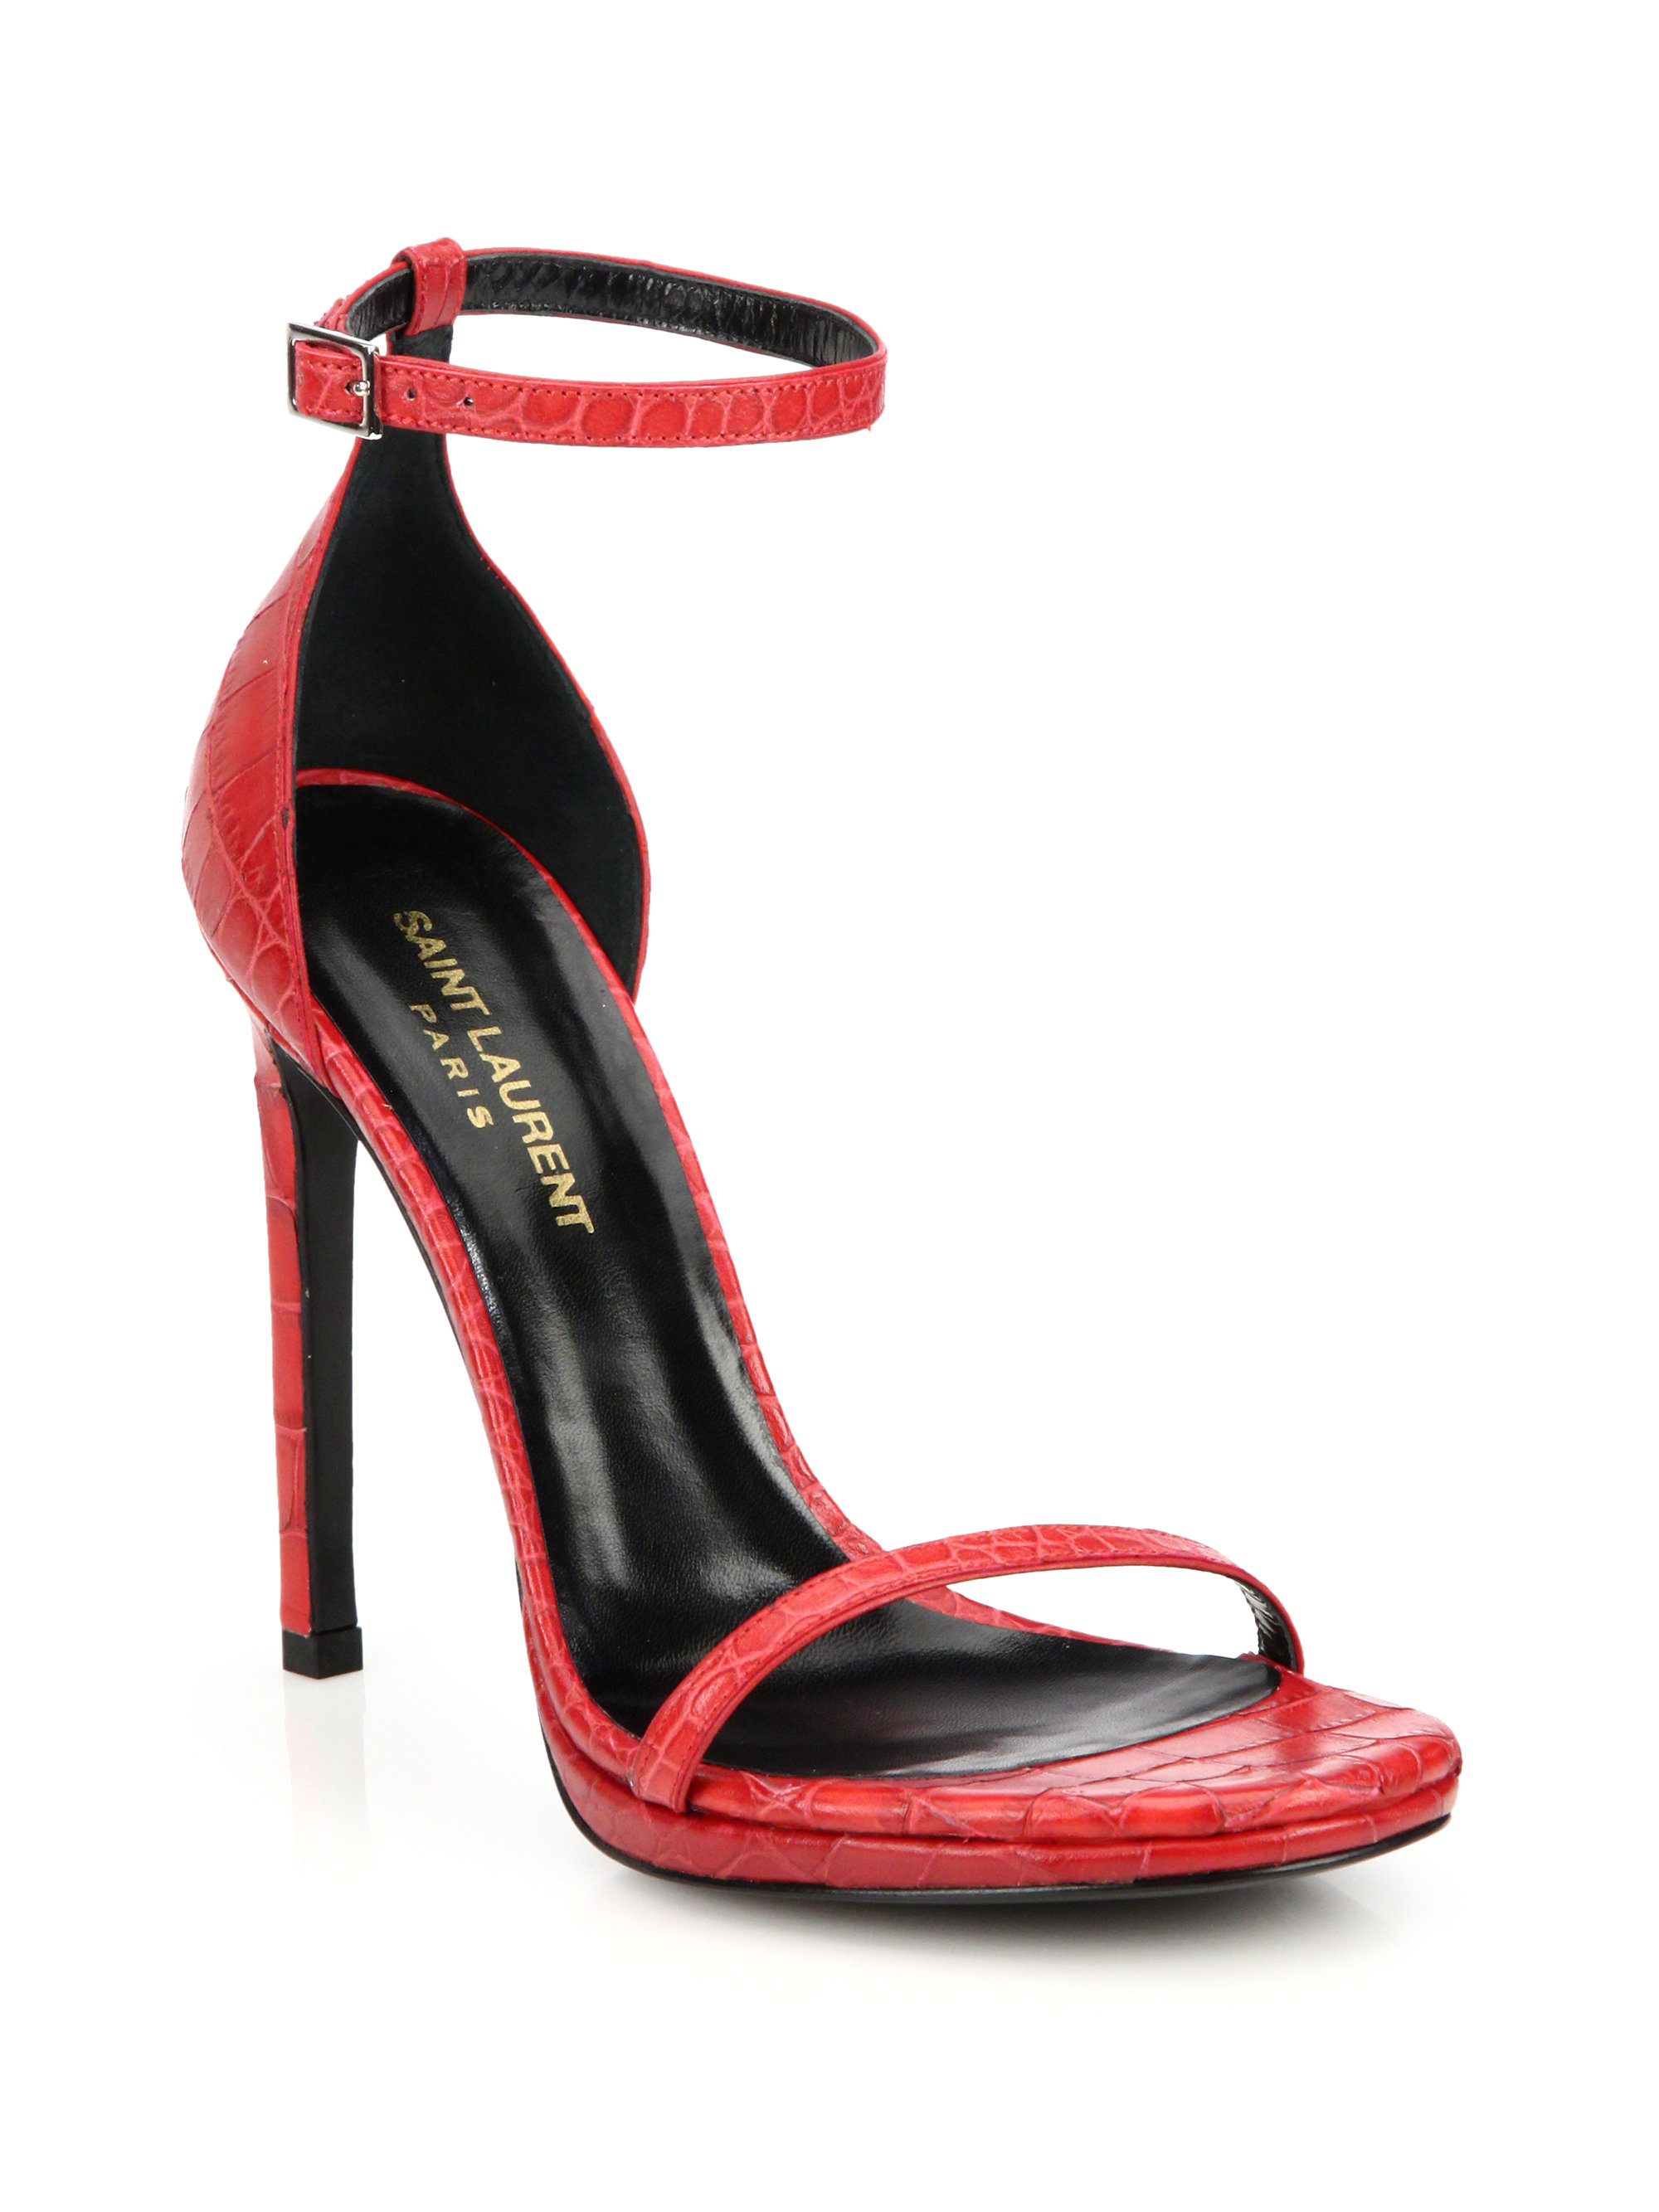 ysl sandals red